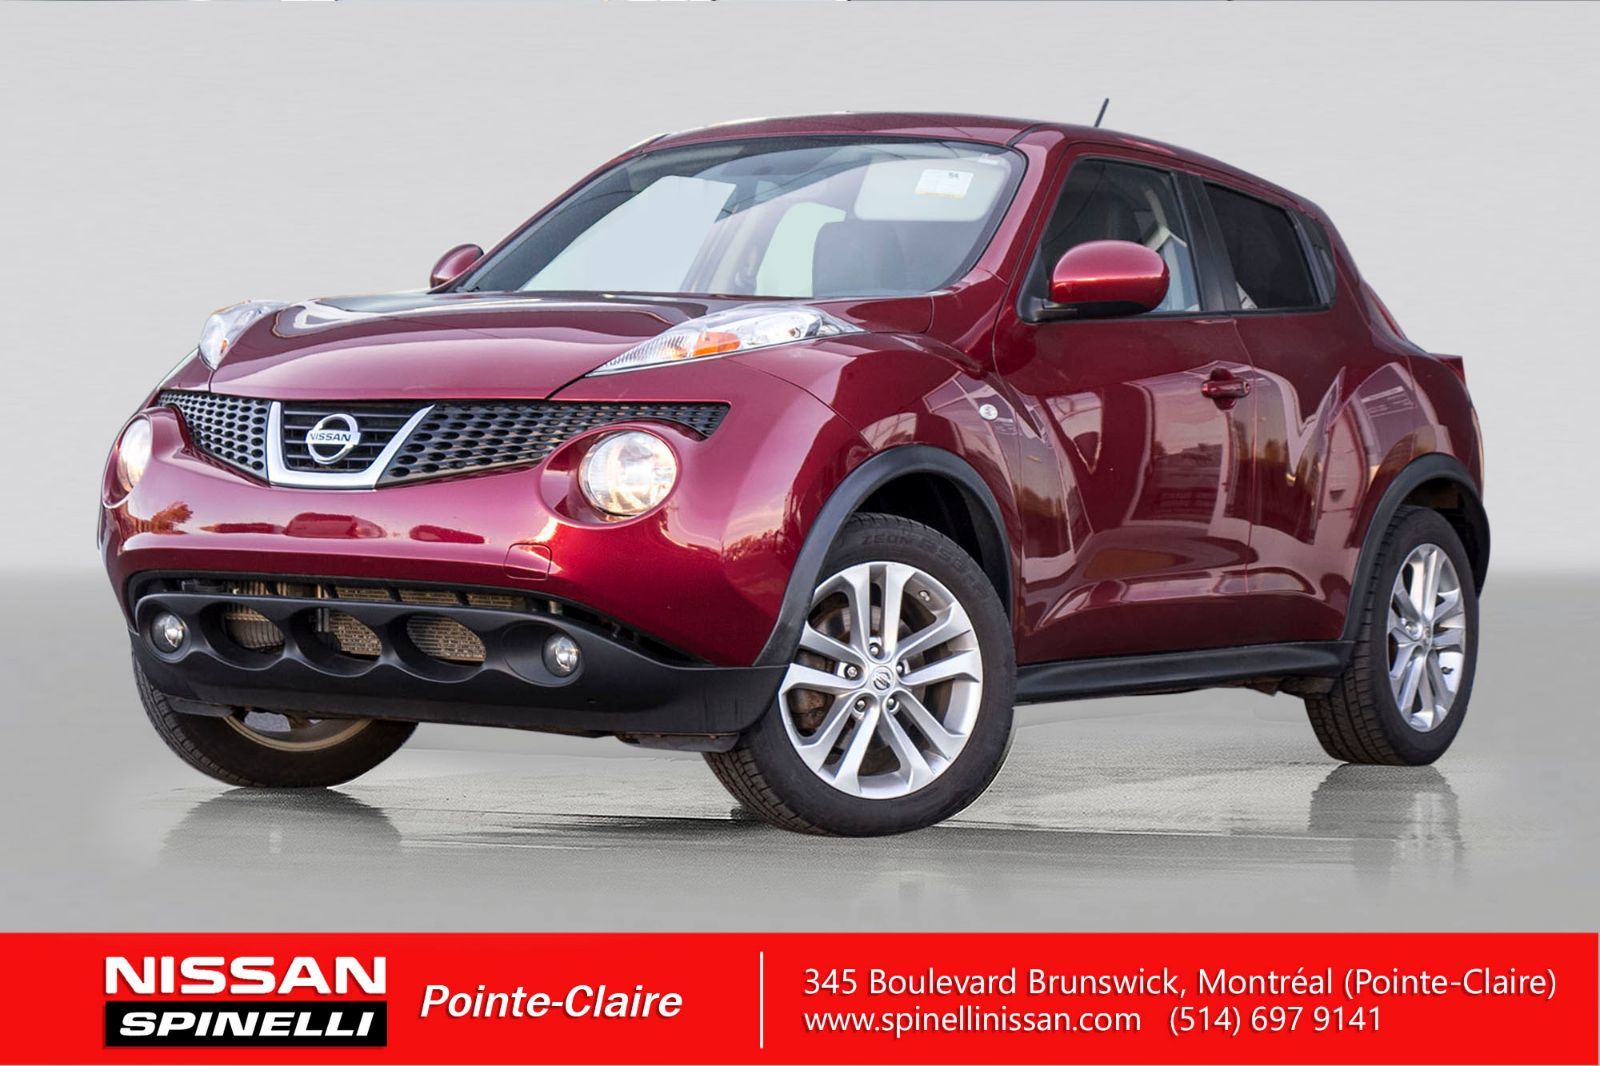 Used 2011 Nissan Juke SL TECH AWD in Montreal, Laval and South Shore ...